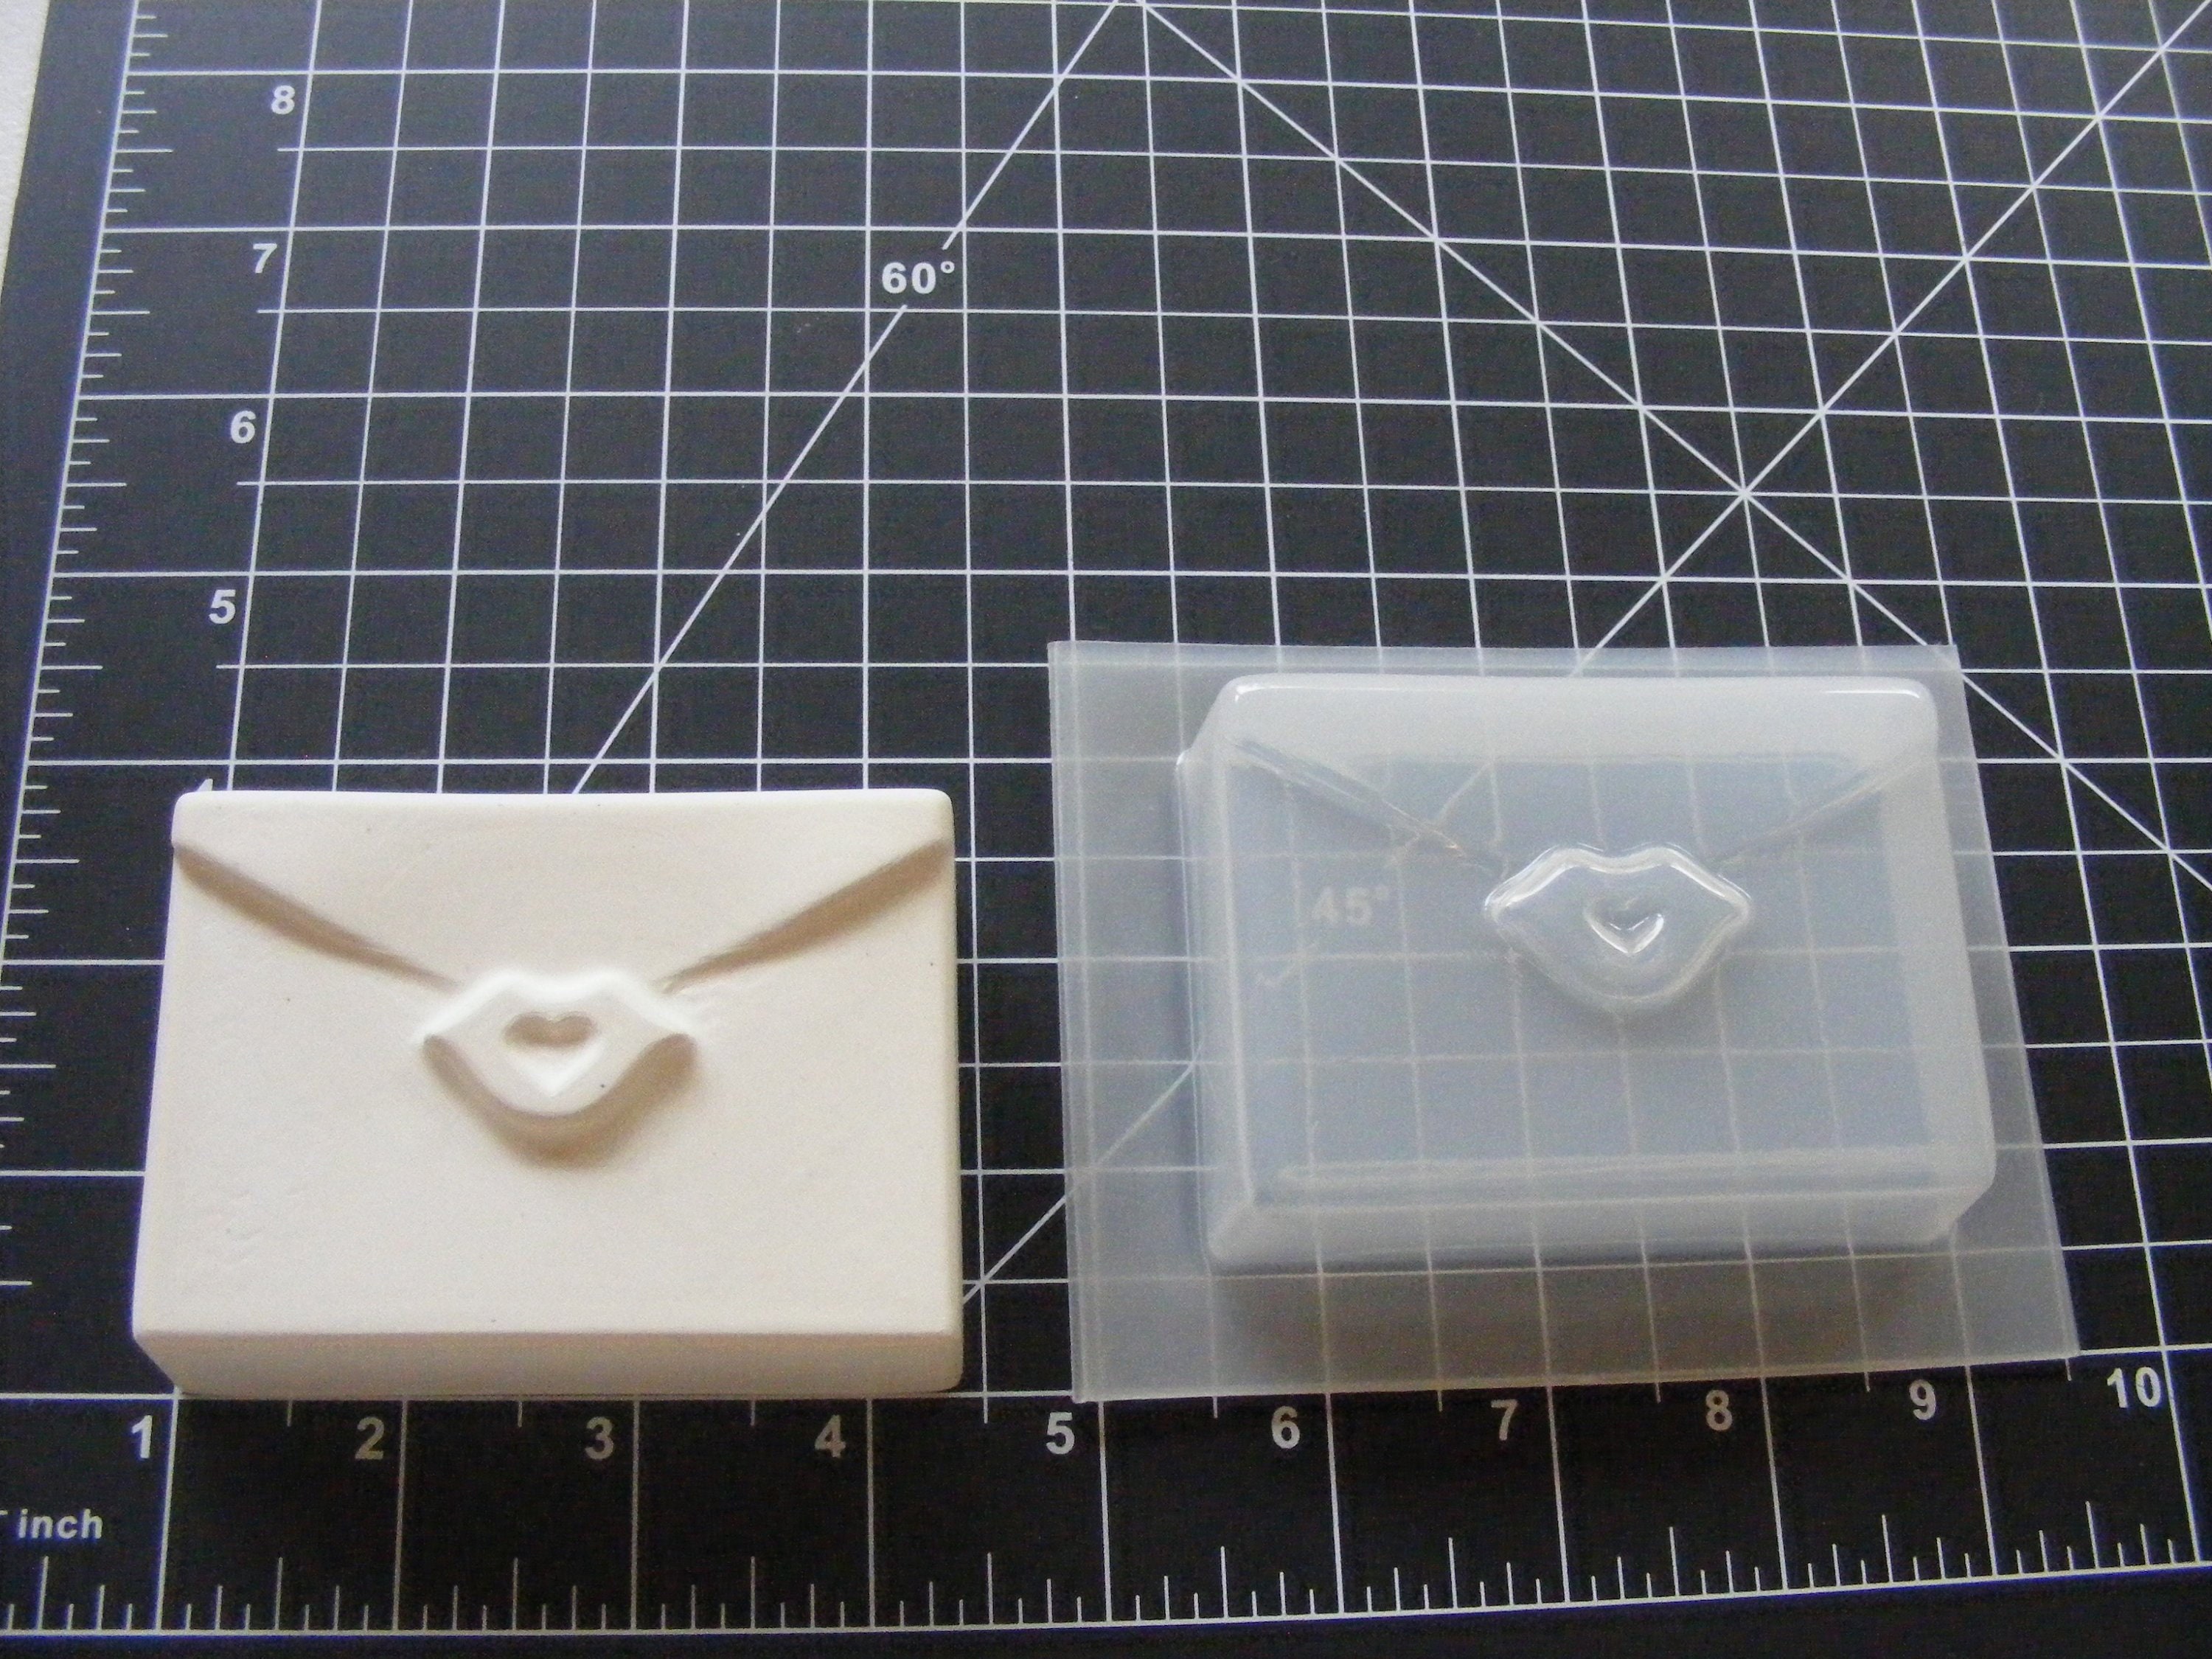 LOVE LETTER PIECES mold Chocolate Candy soap making valentines cake toppers